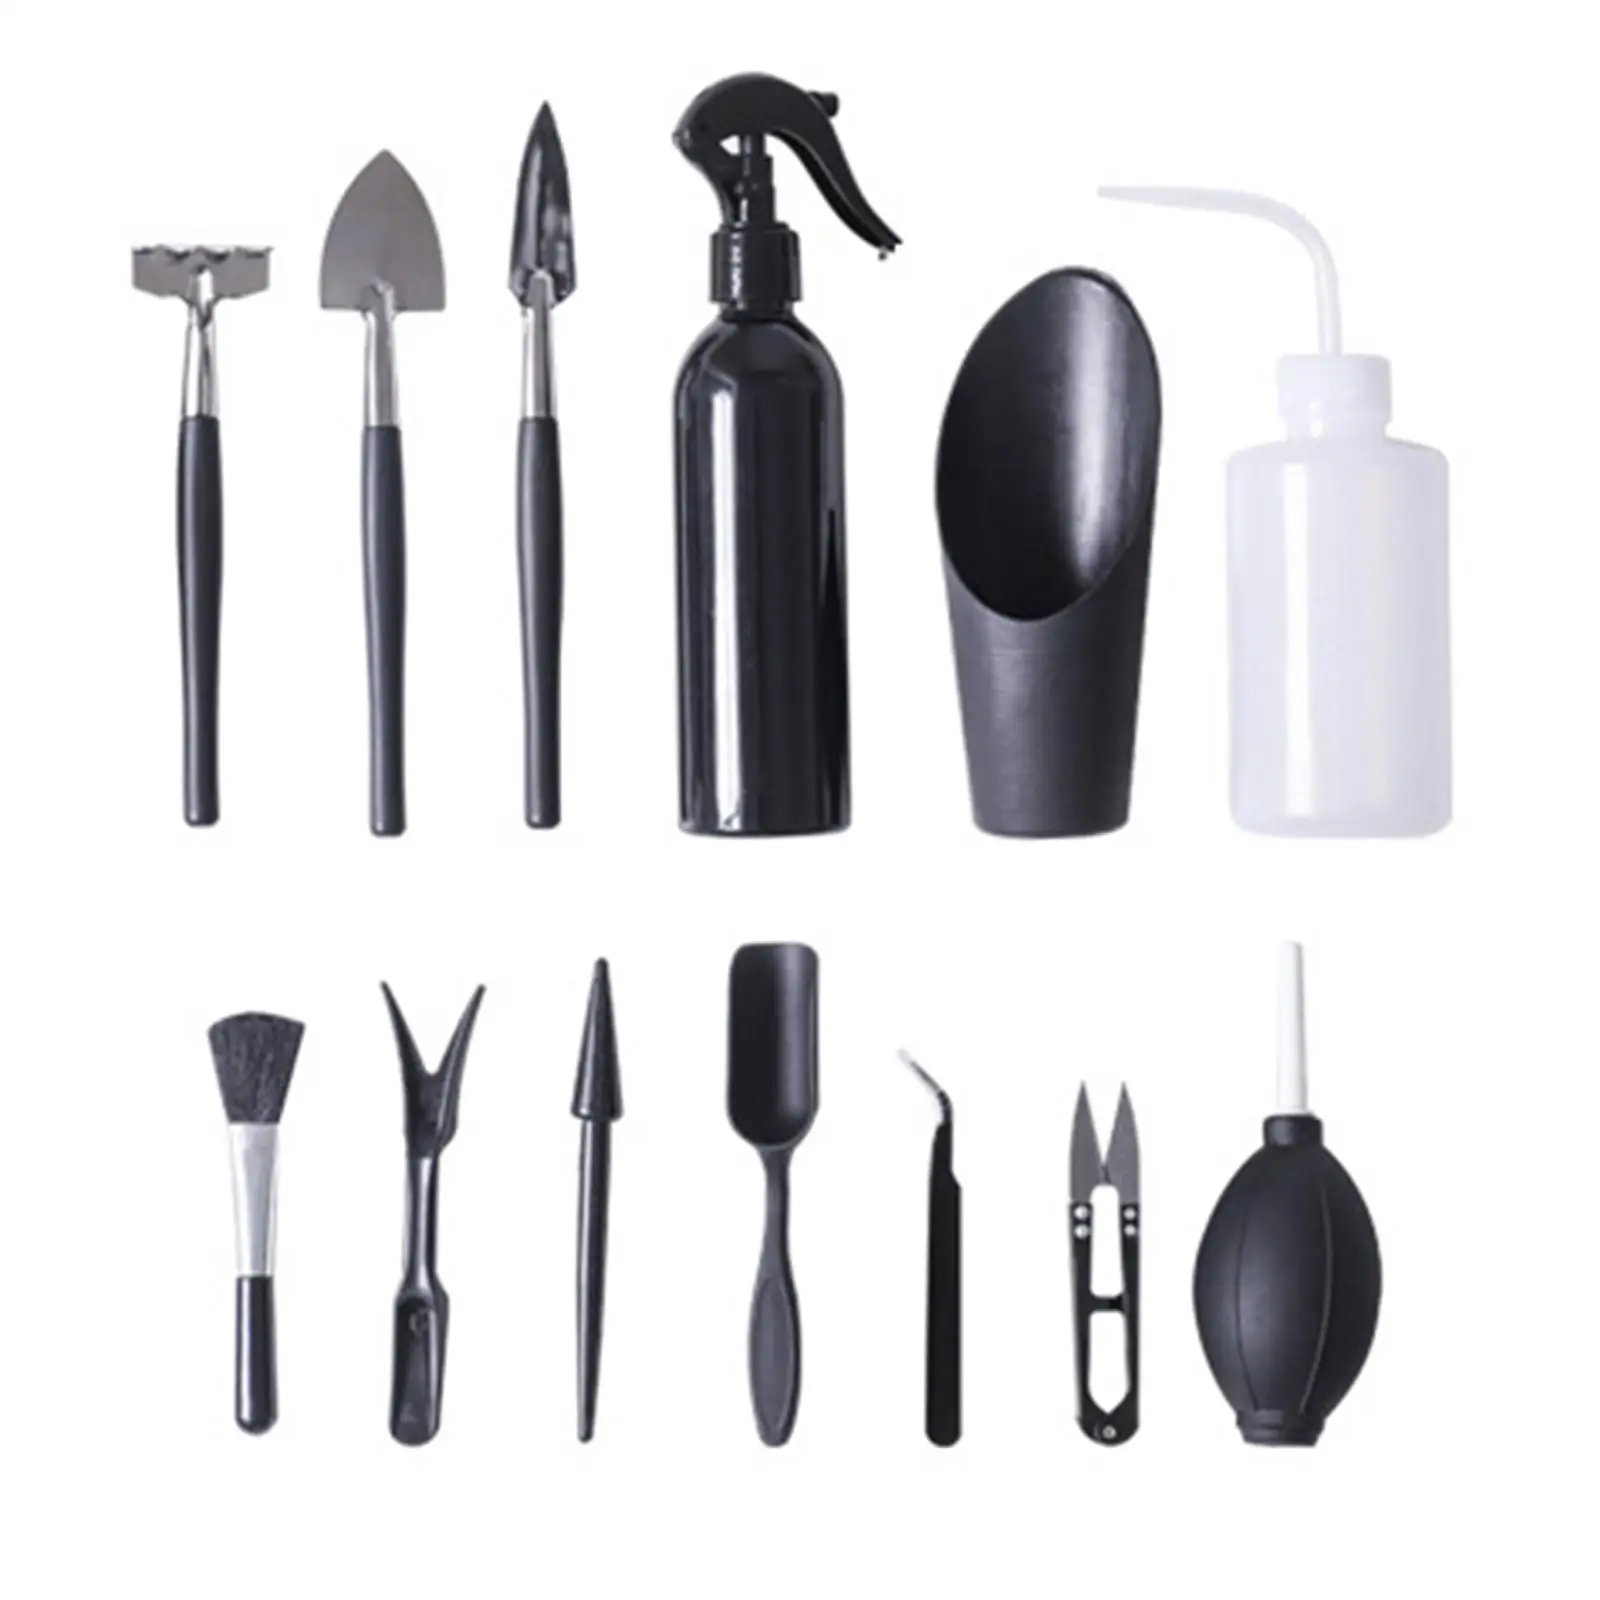 Hand Transplanting Tools Kit 13 Pieces for , Houseplant, Bonsai Tools Stainless Steel, PP Materials Easy to Carry Accessory